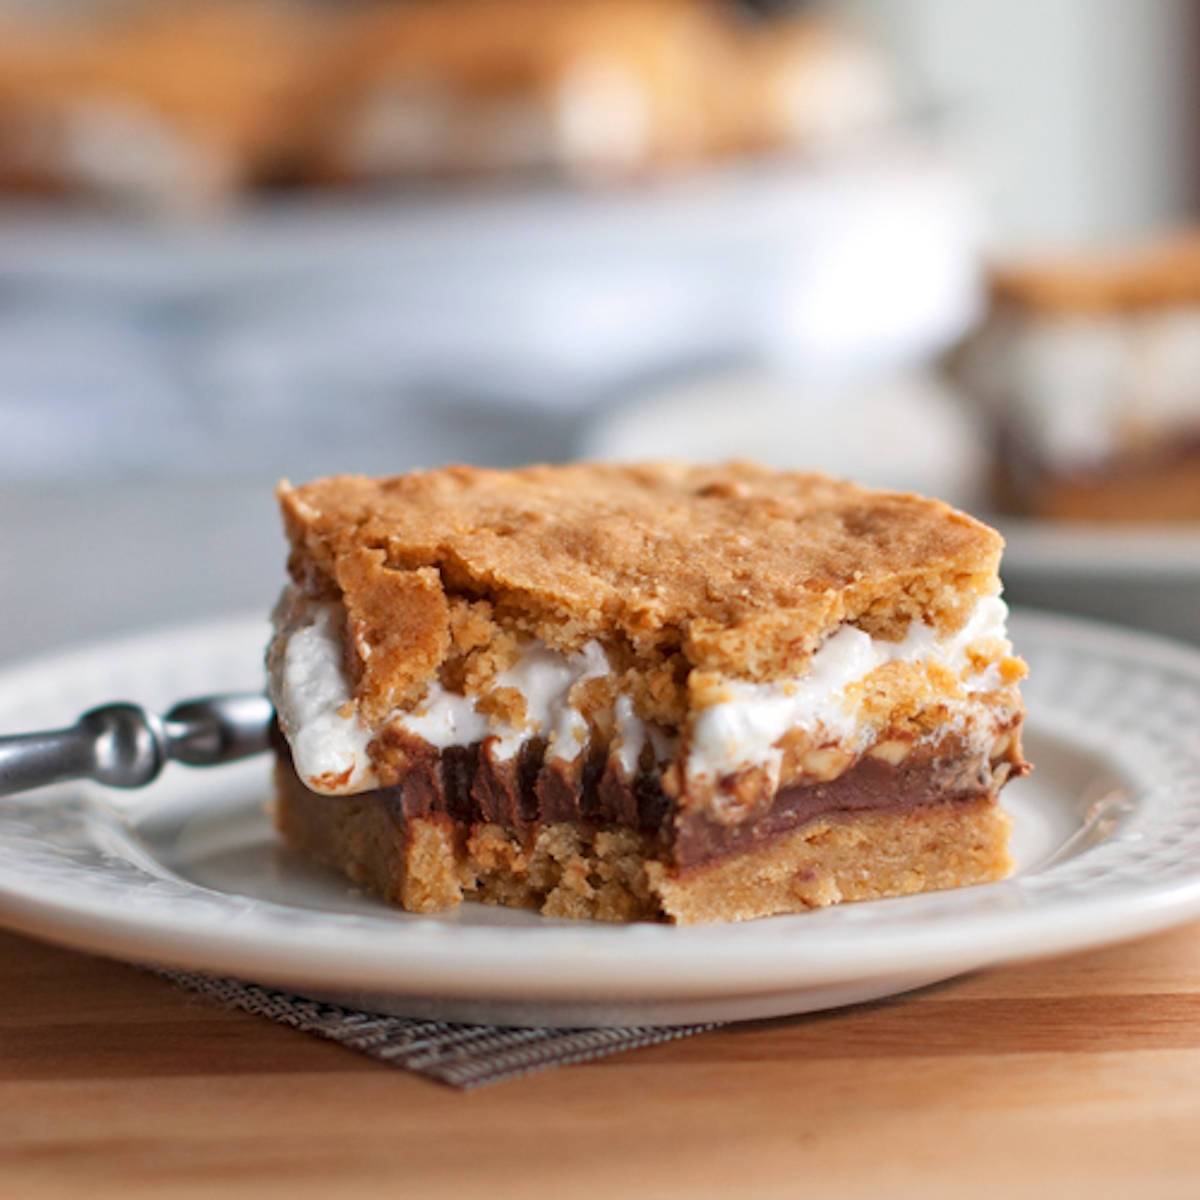 One s'mores bar layered in between marshmallow fluff, chocolate, and a graham cookie base. 